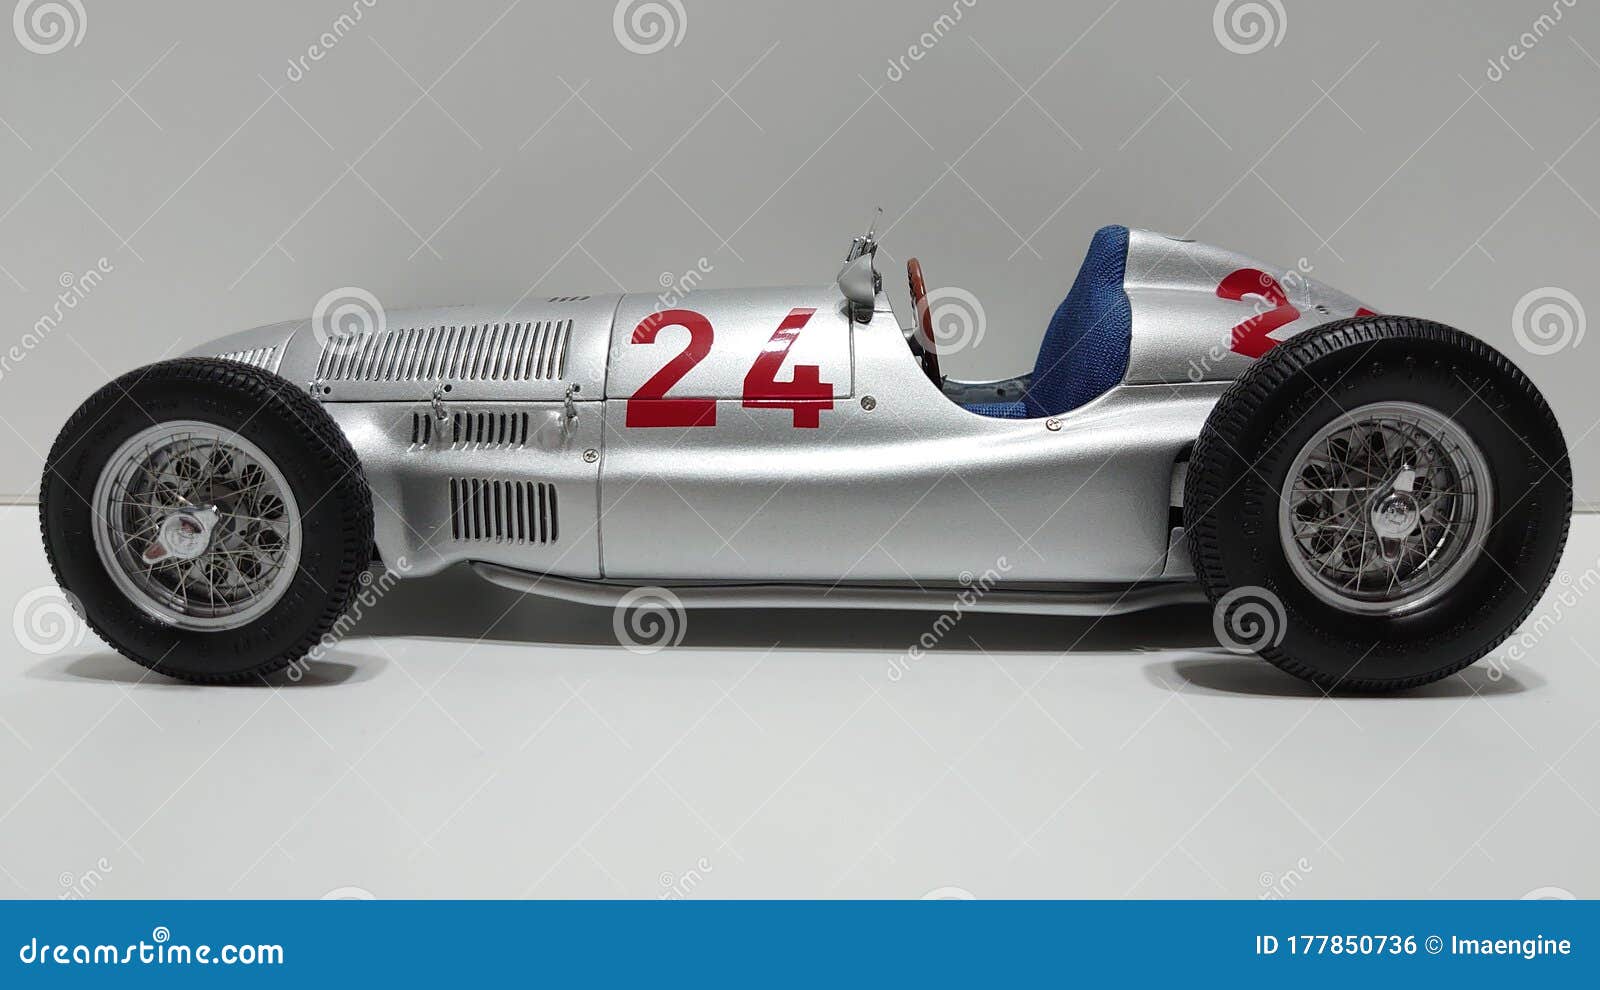 Cmc 1/18 Scale Model Car - Mercedes Benz W165 Formula One Monopost Racing  Vehicle Editorial Photo - Image of furniture, aircraft: 177850736